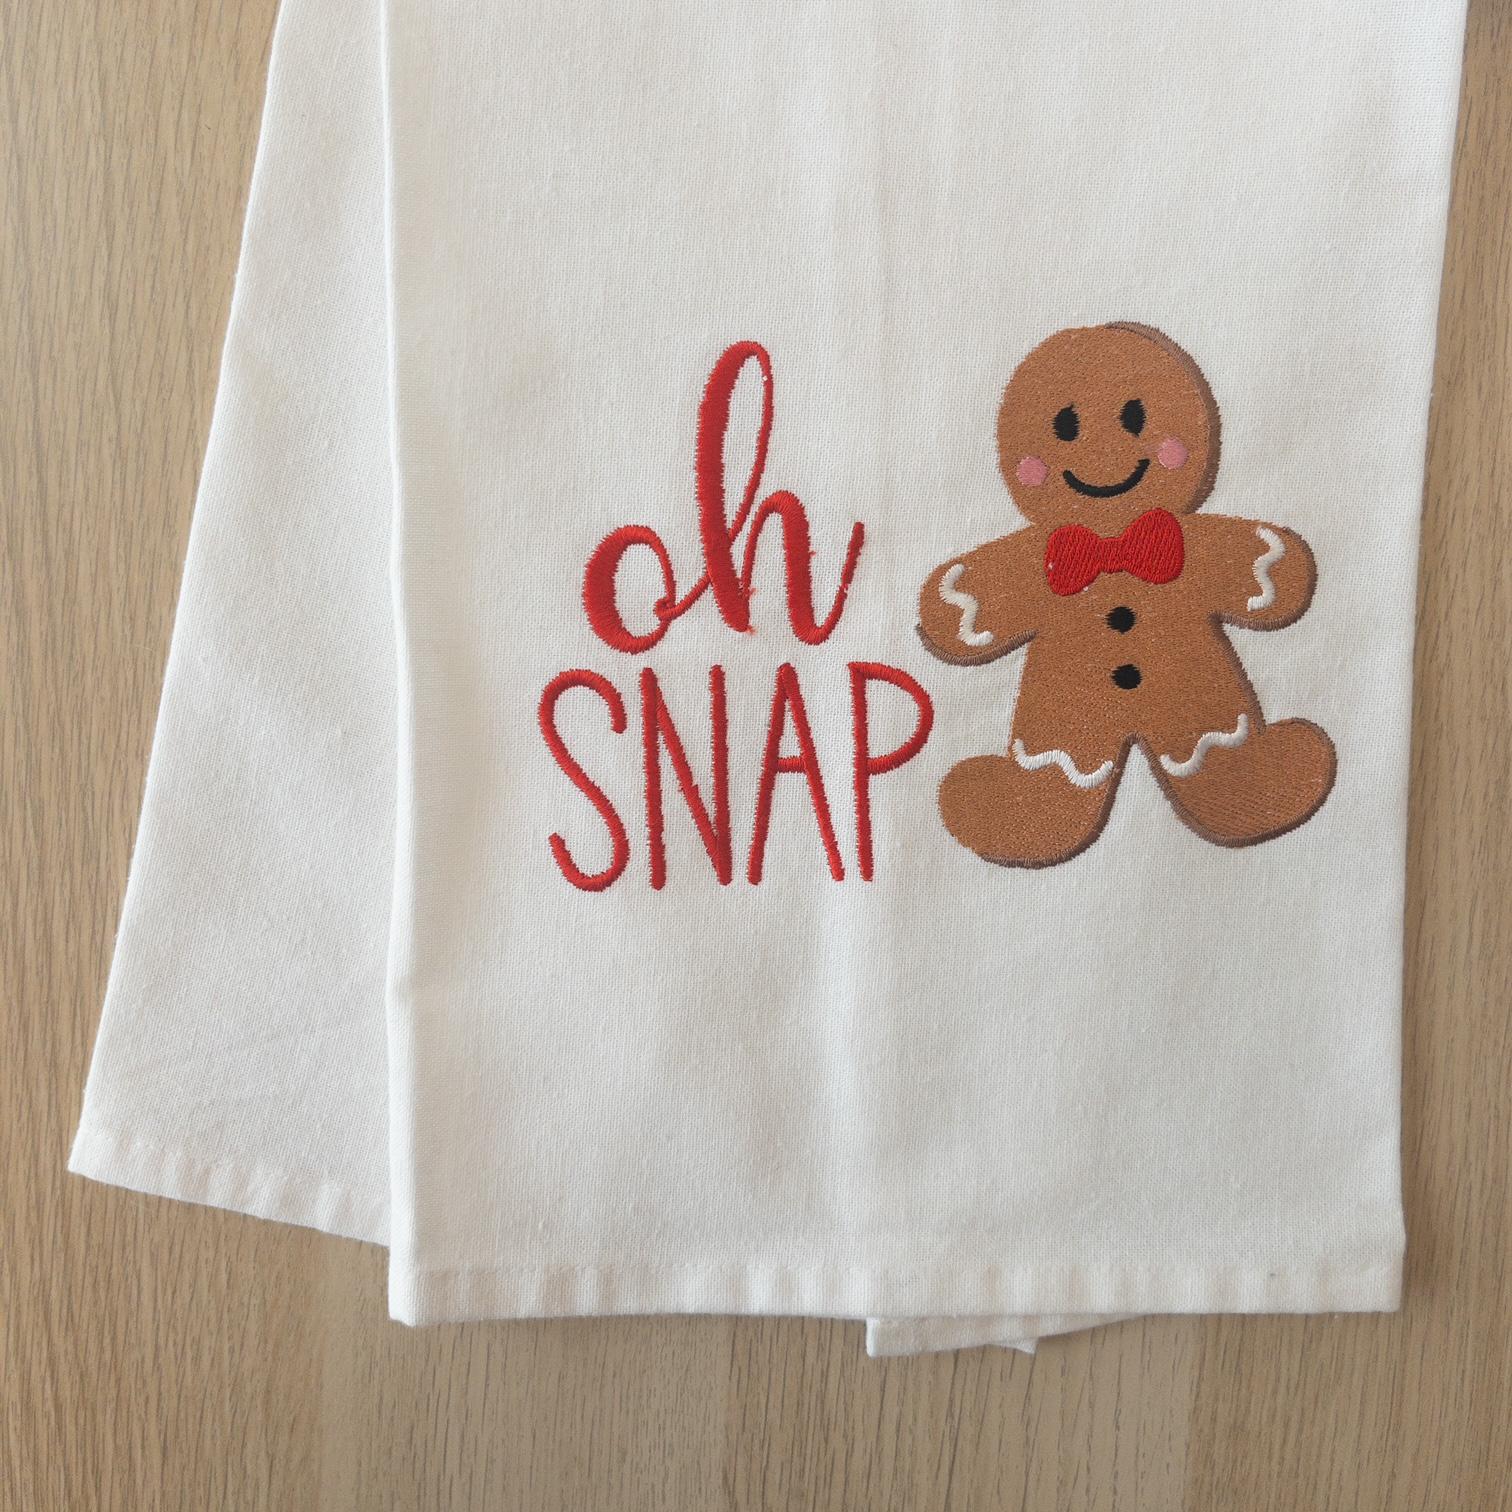 Oh Snap Kitchen Towel